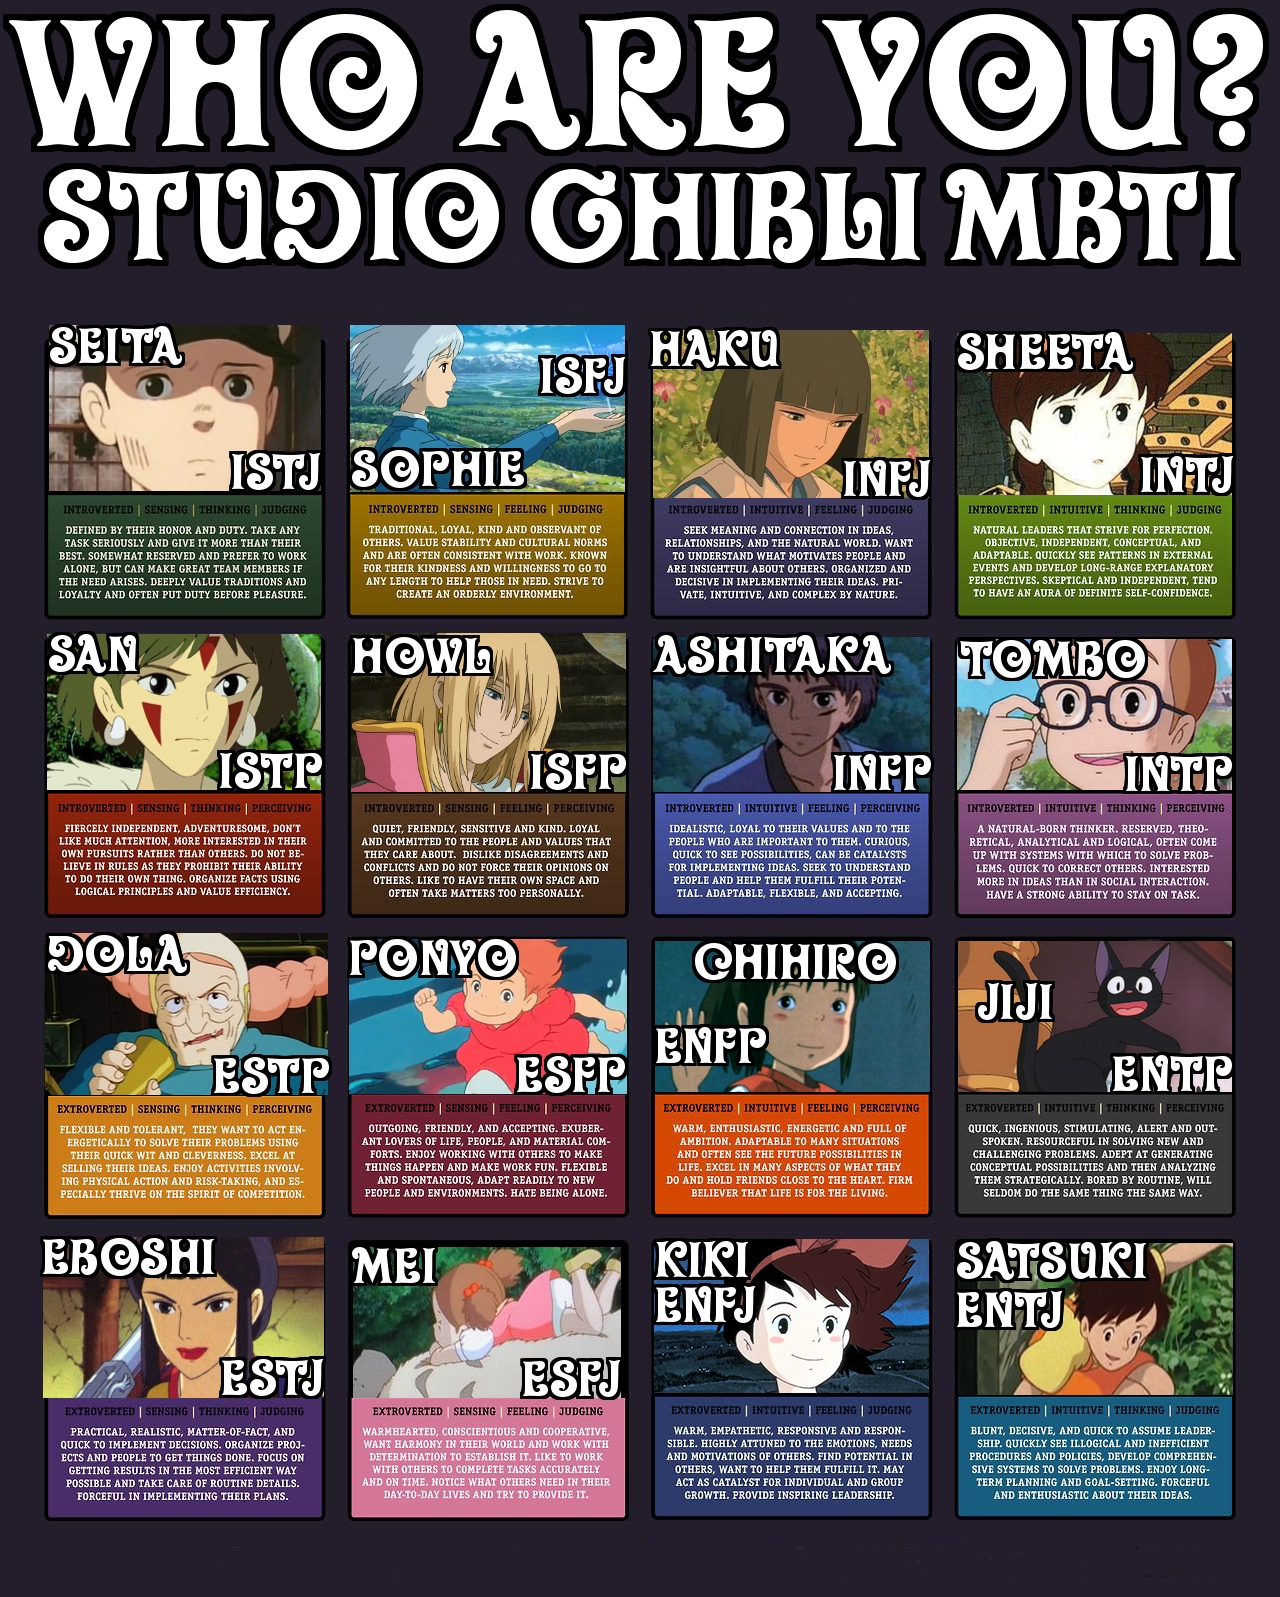 Anime Personality Test: What Is Your Anime Personality? - ProProfs Quiz